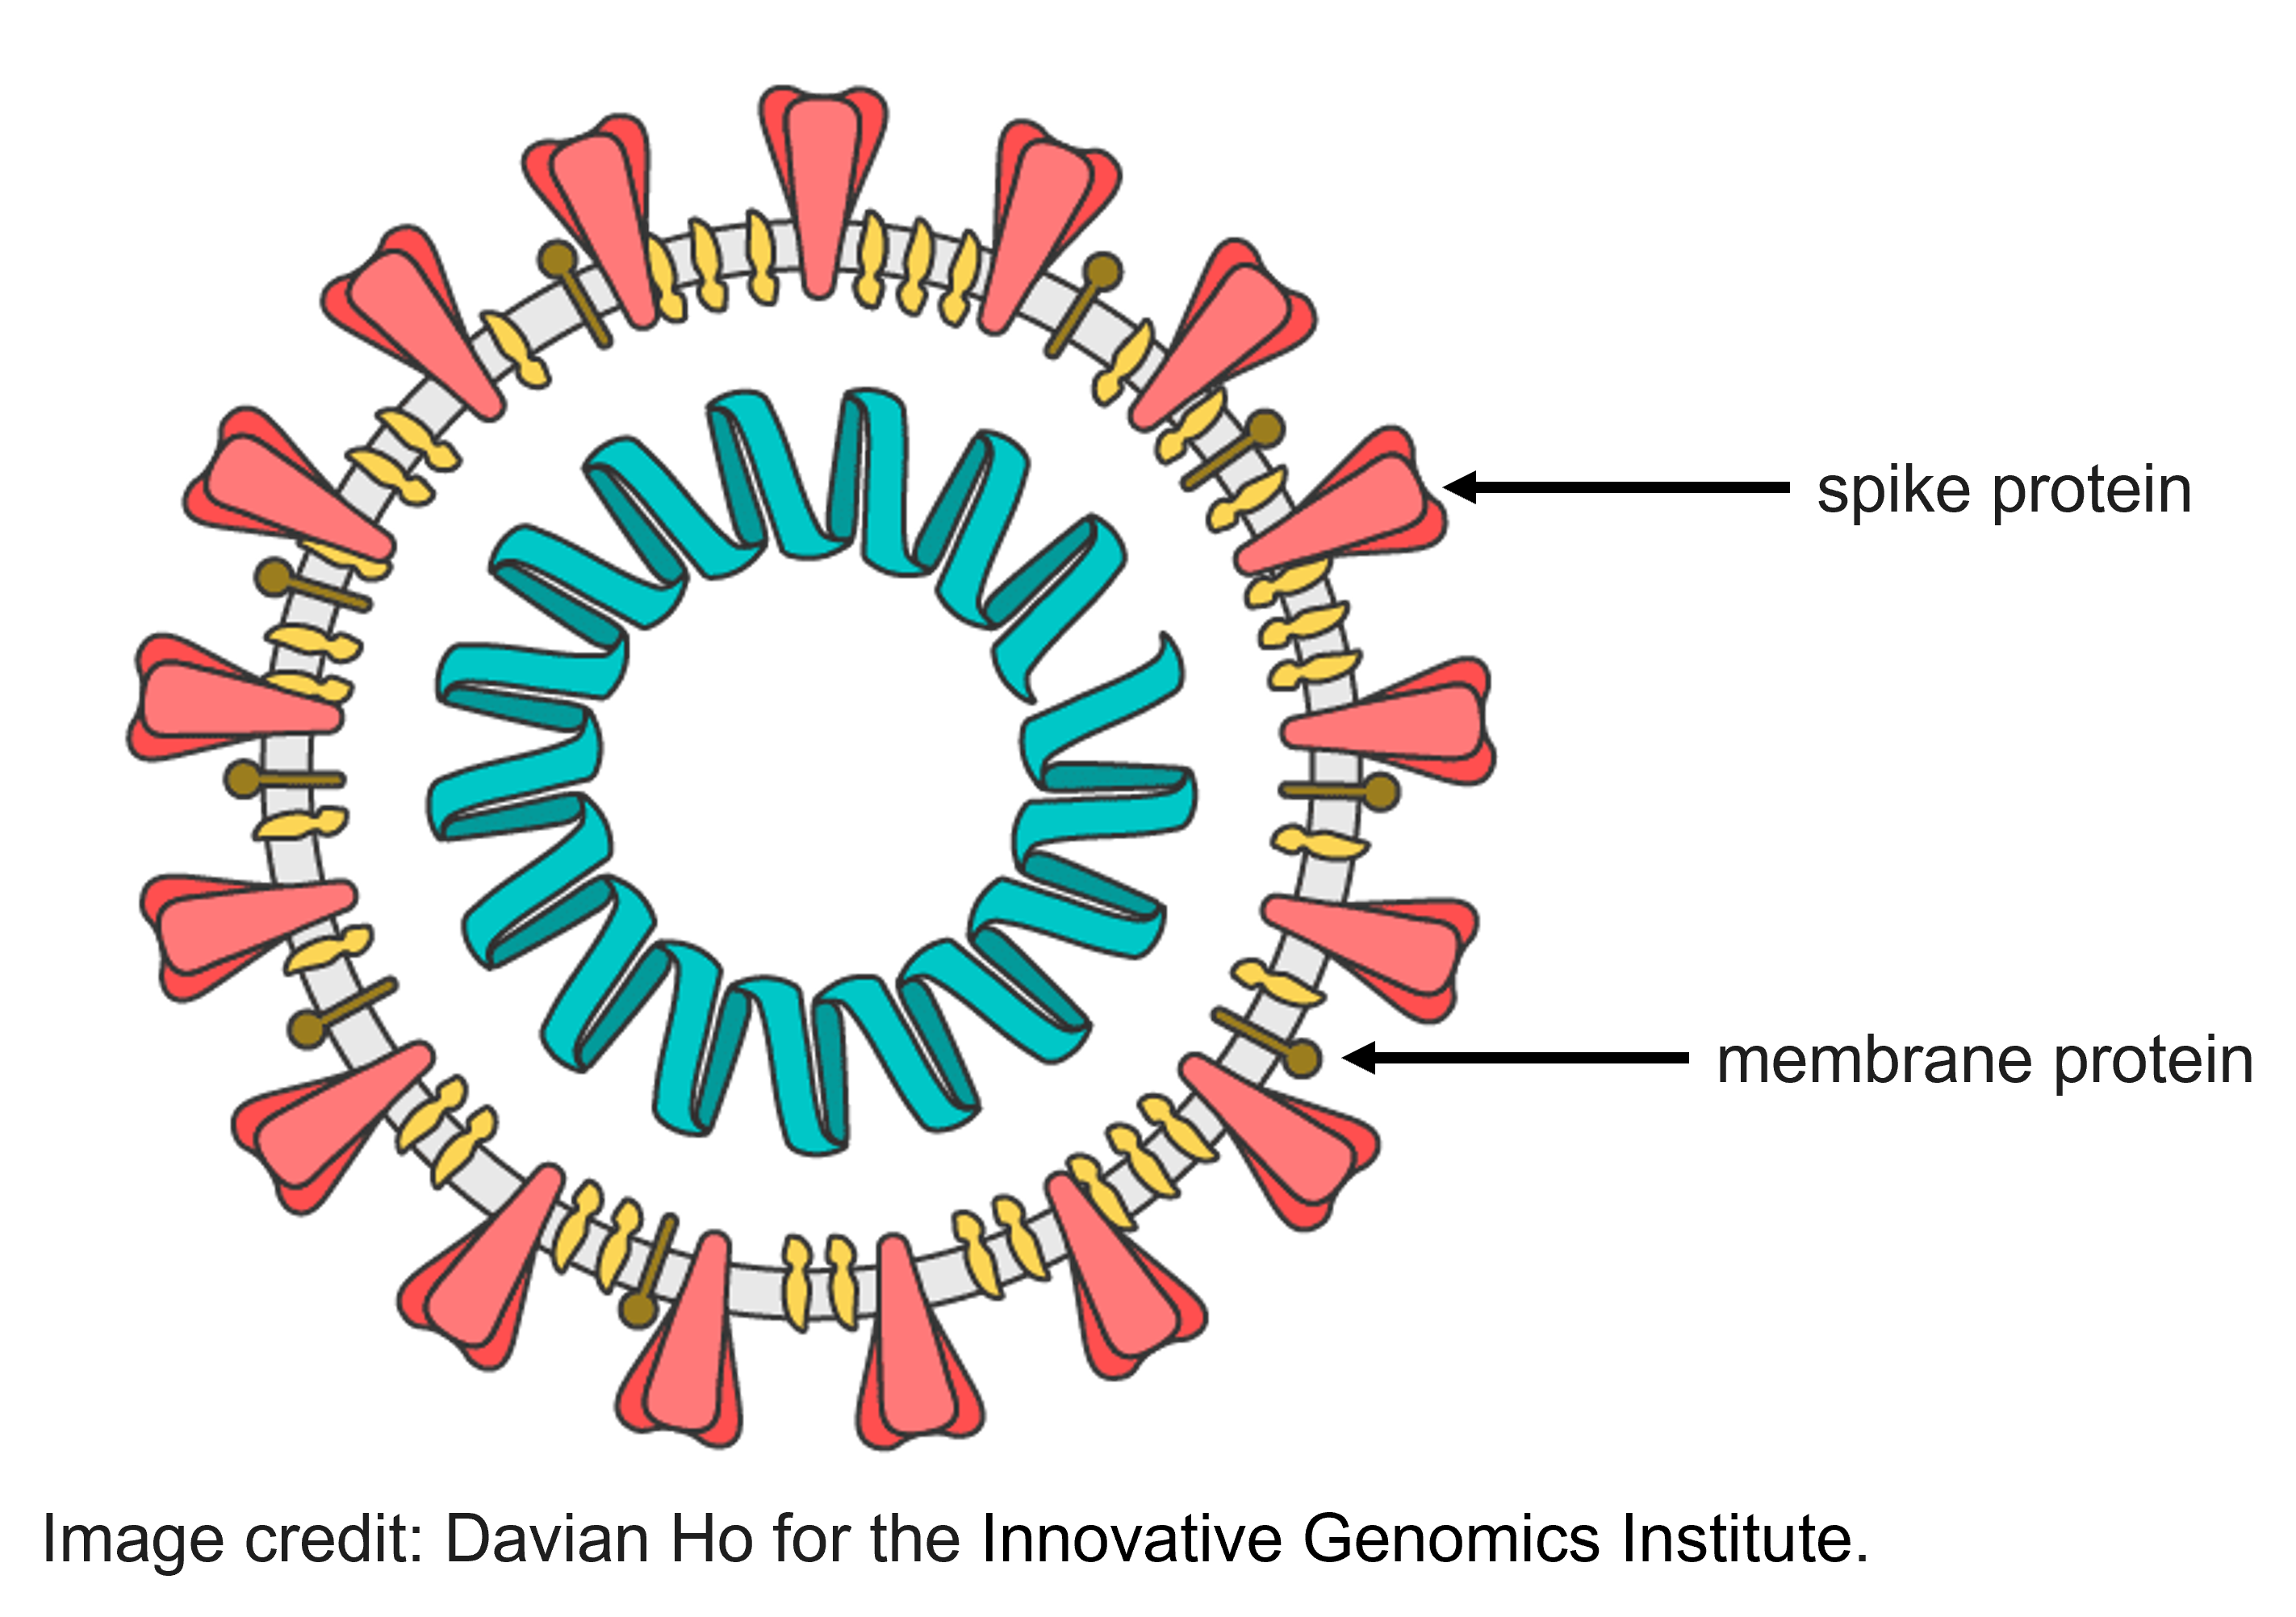 Illustration of spike and membrane proteins on virus capsule